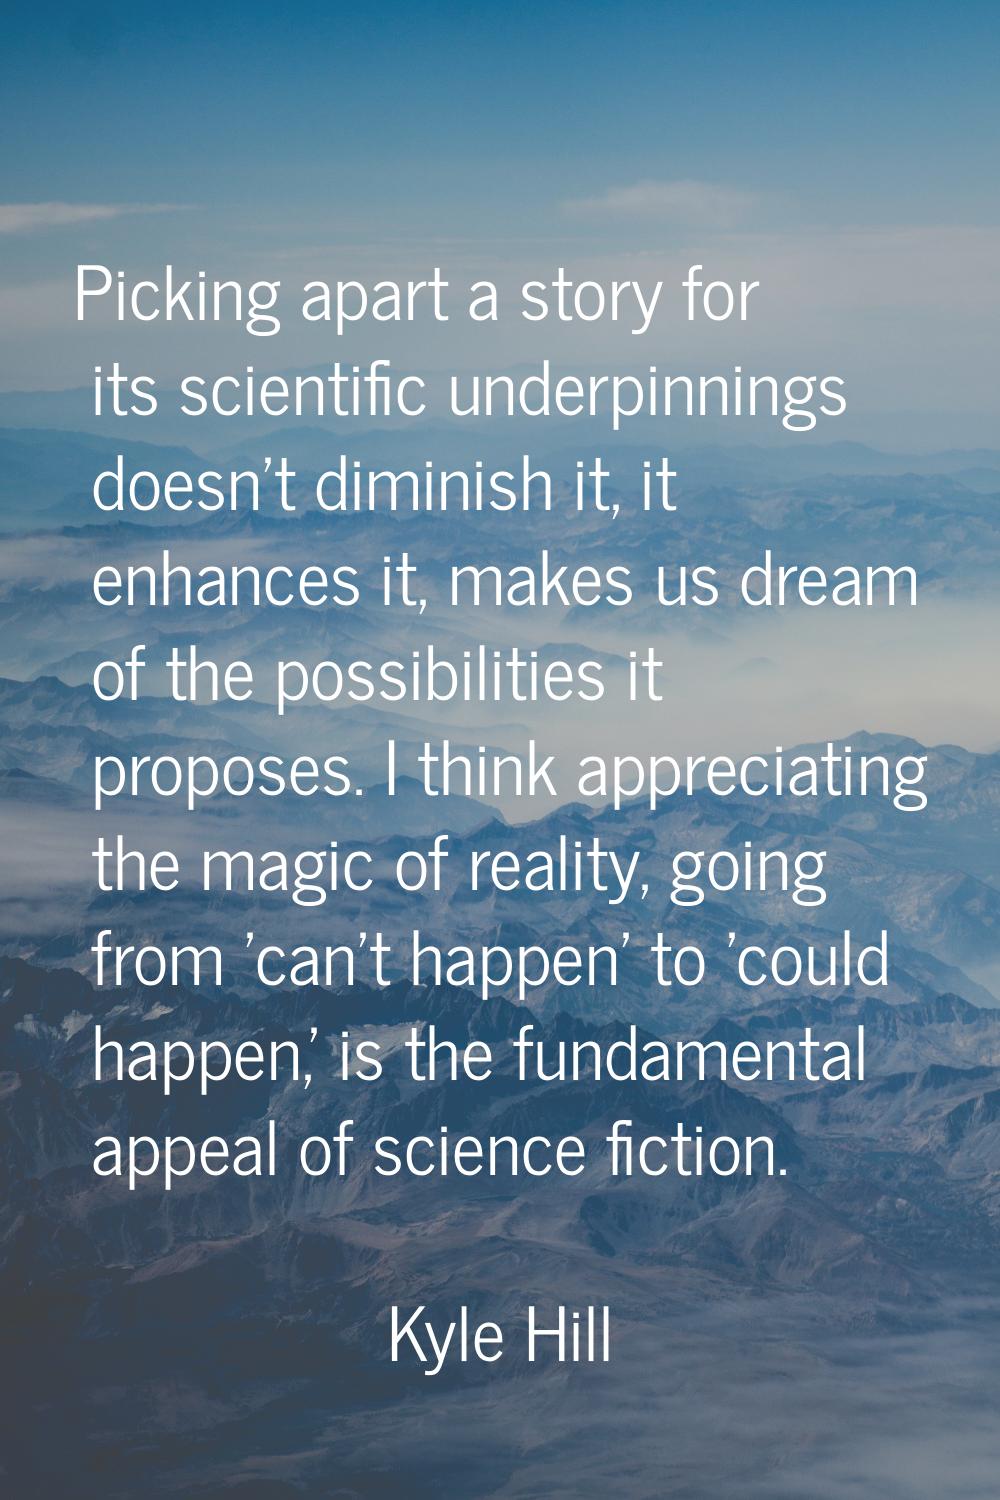 Picking apart a story for its scientific underpinnings doesn't diminish it, it enhances it, makes u